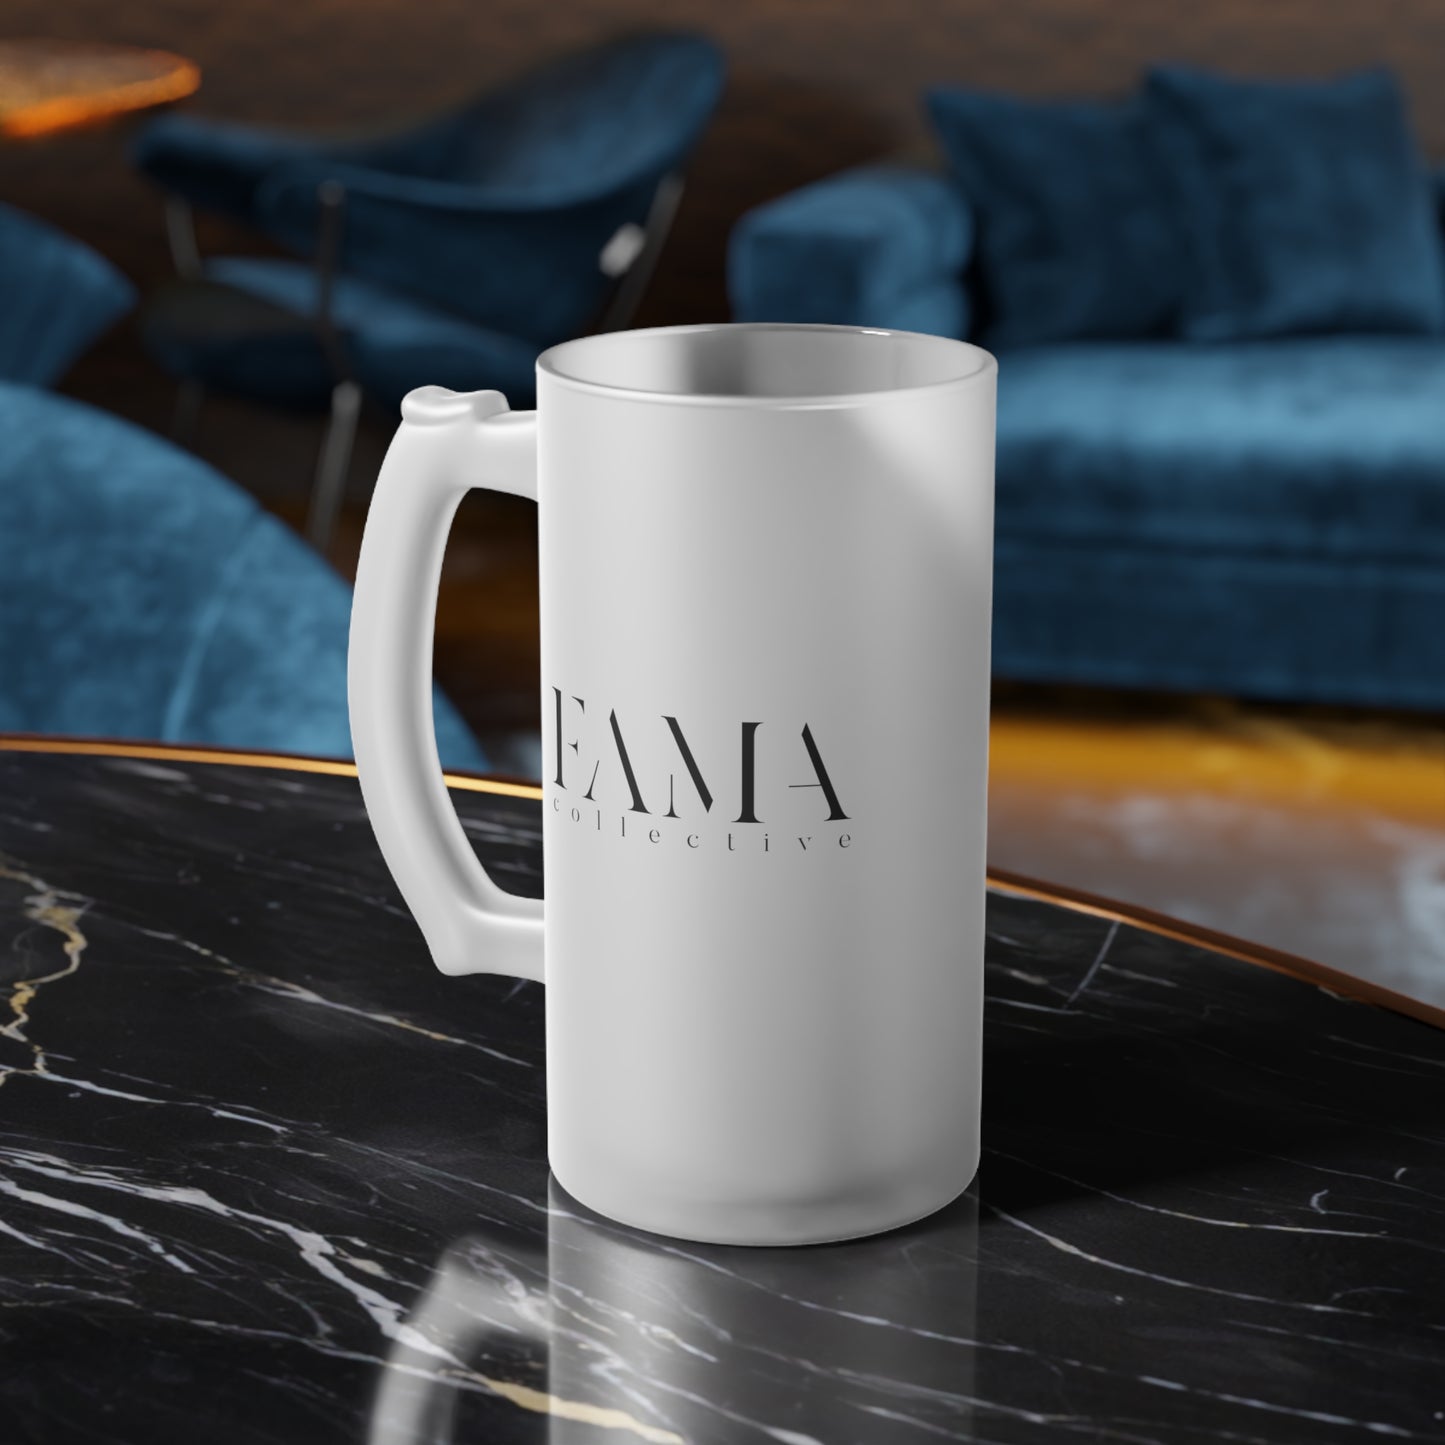 FAMA Collective Frosted Glass Beer Mug